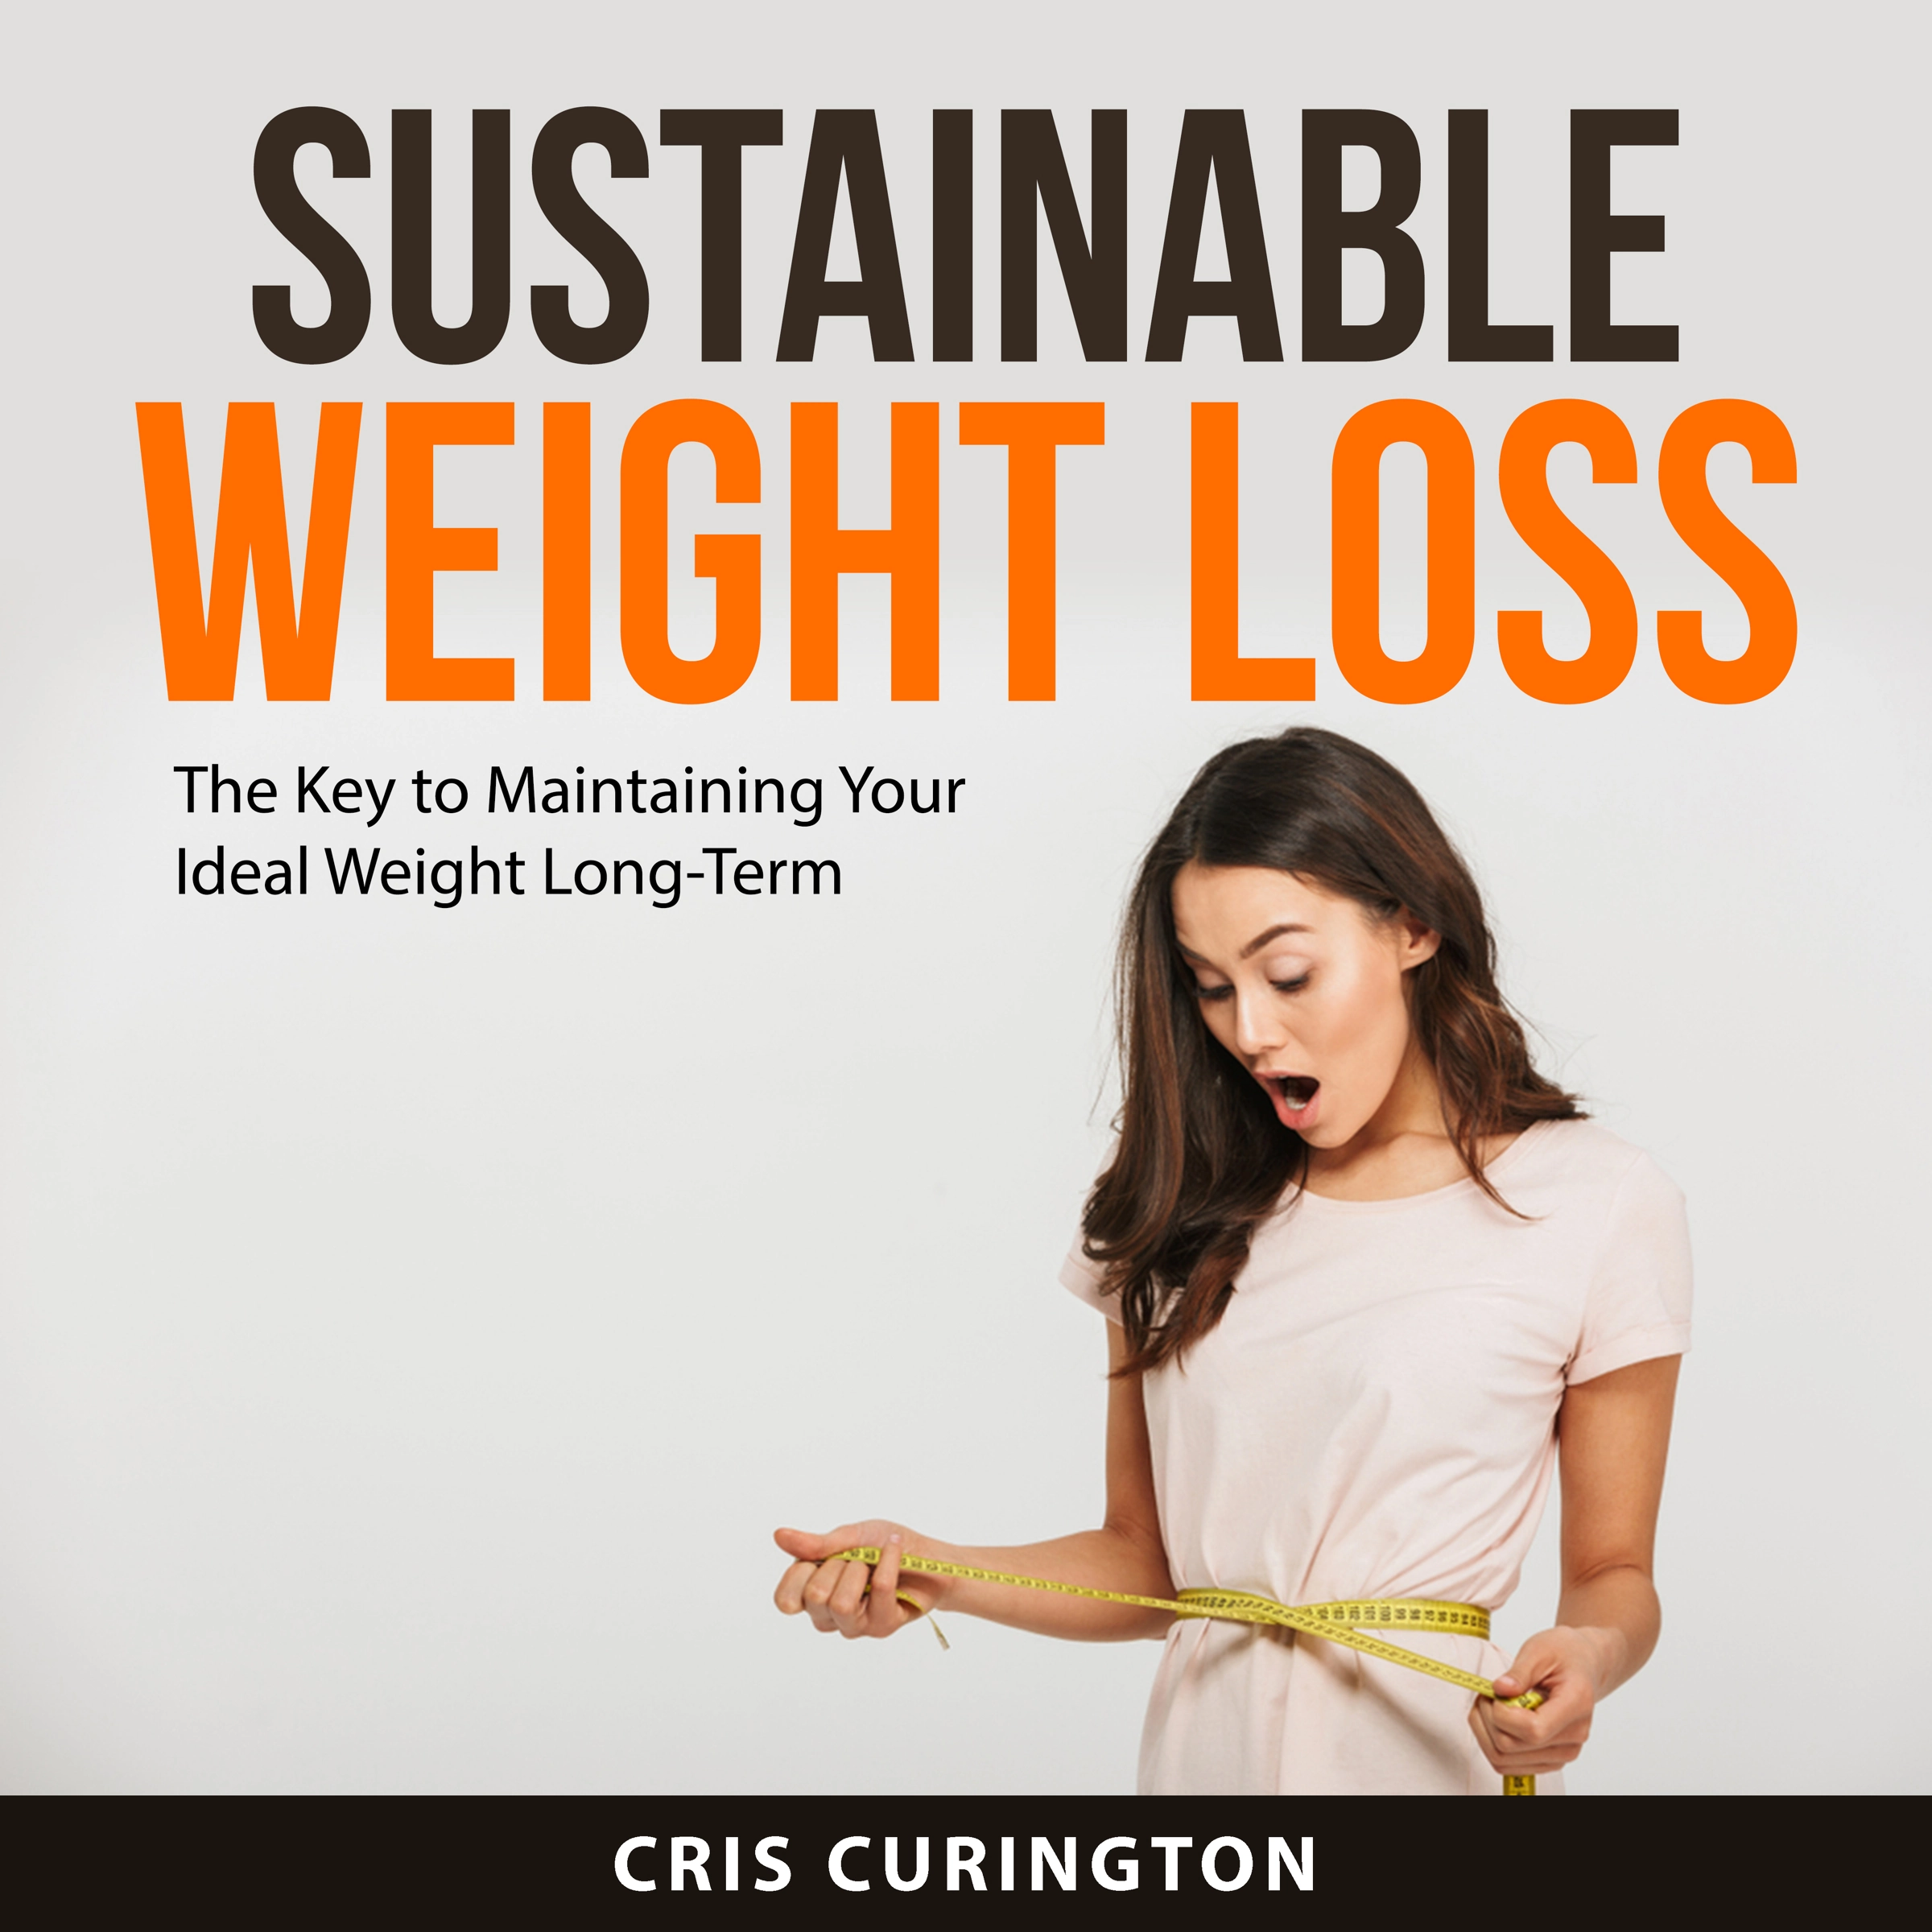 Sustainable Weight Loss Audiobook by Cris Curington